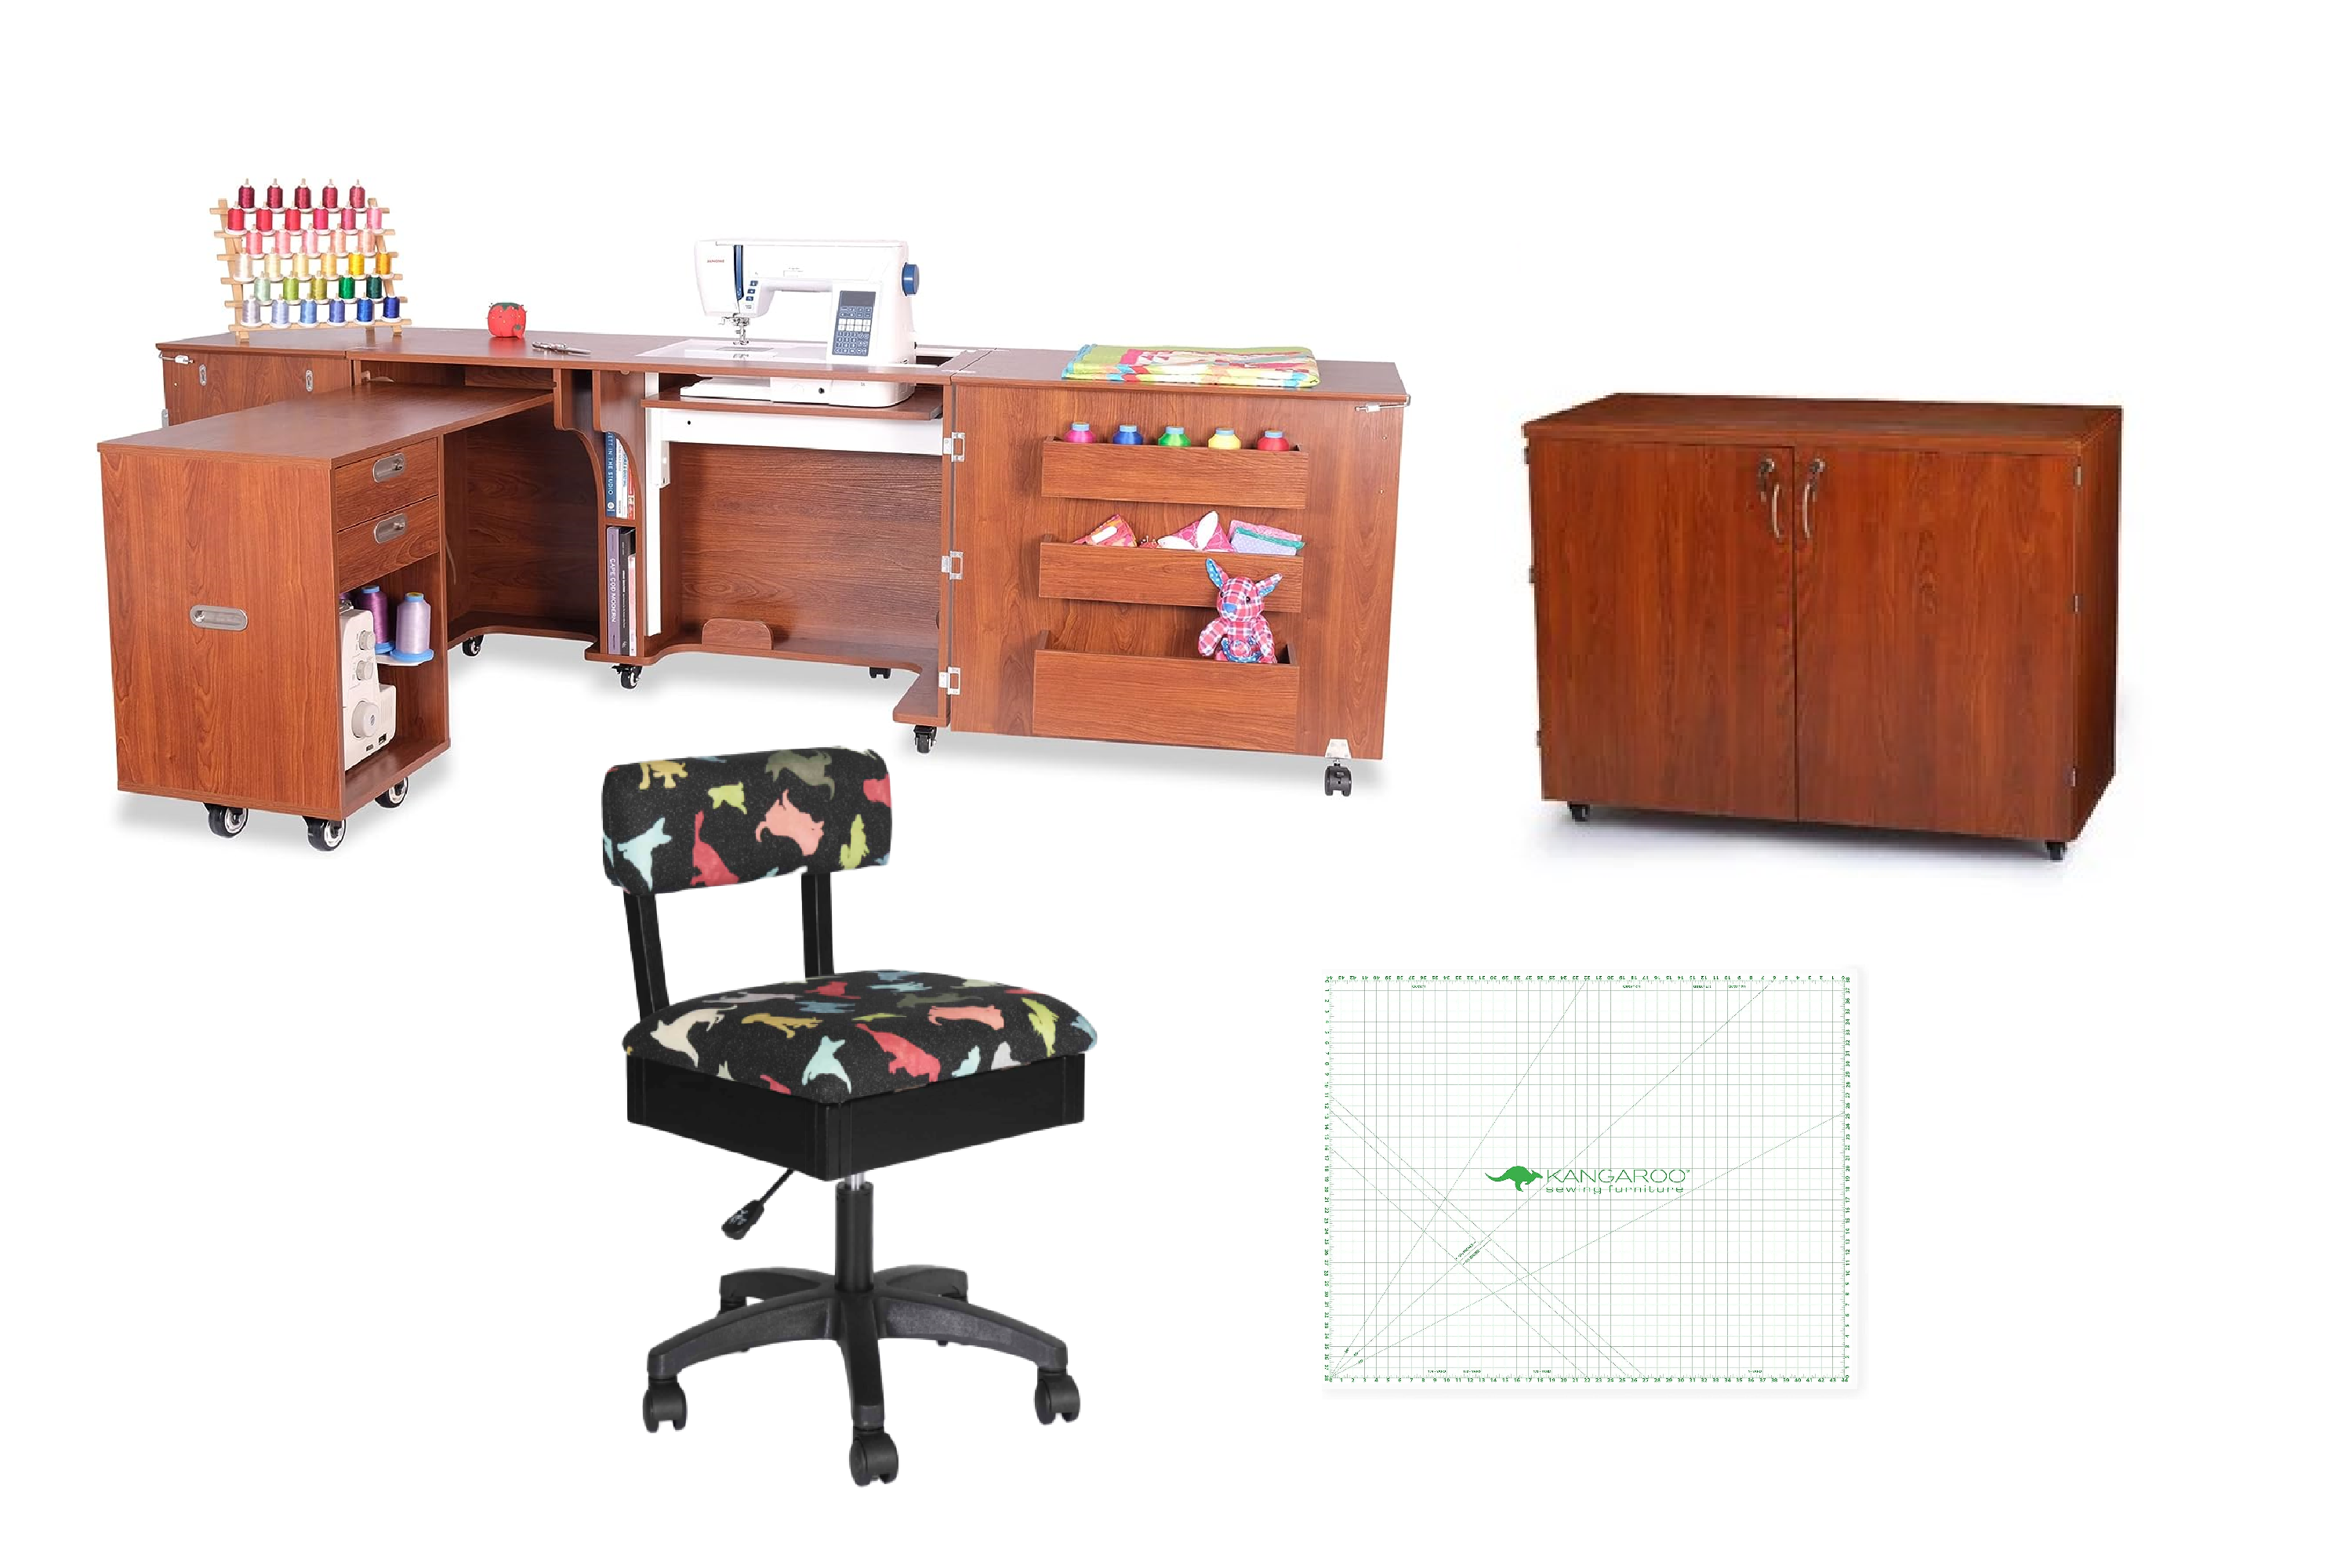 Arrow Sewing Aussie + Dingo Sewing and Crafting Furniture Bundle